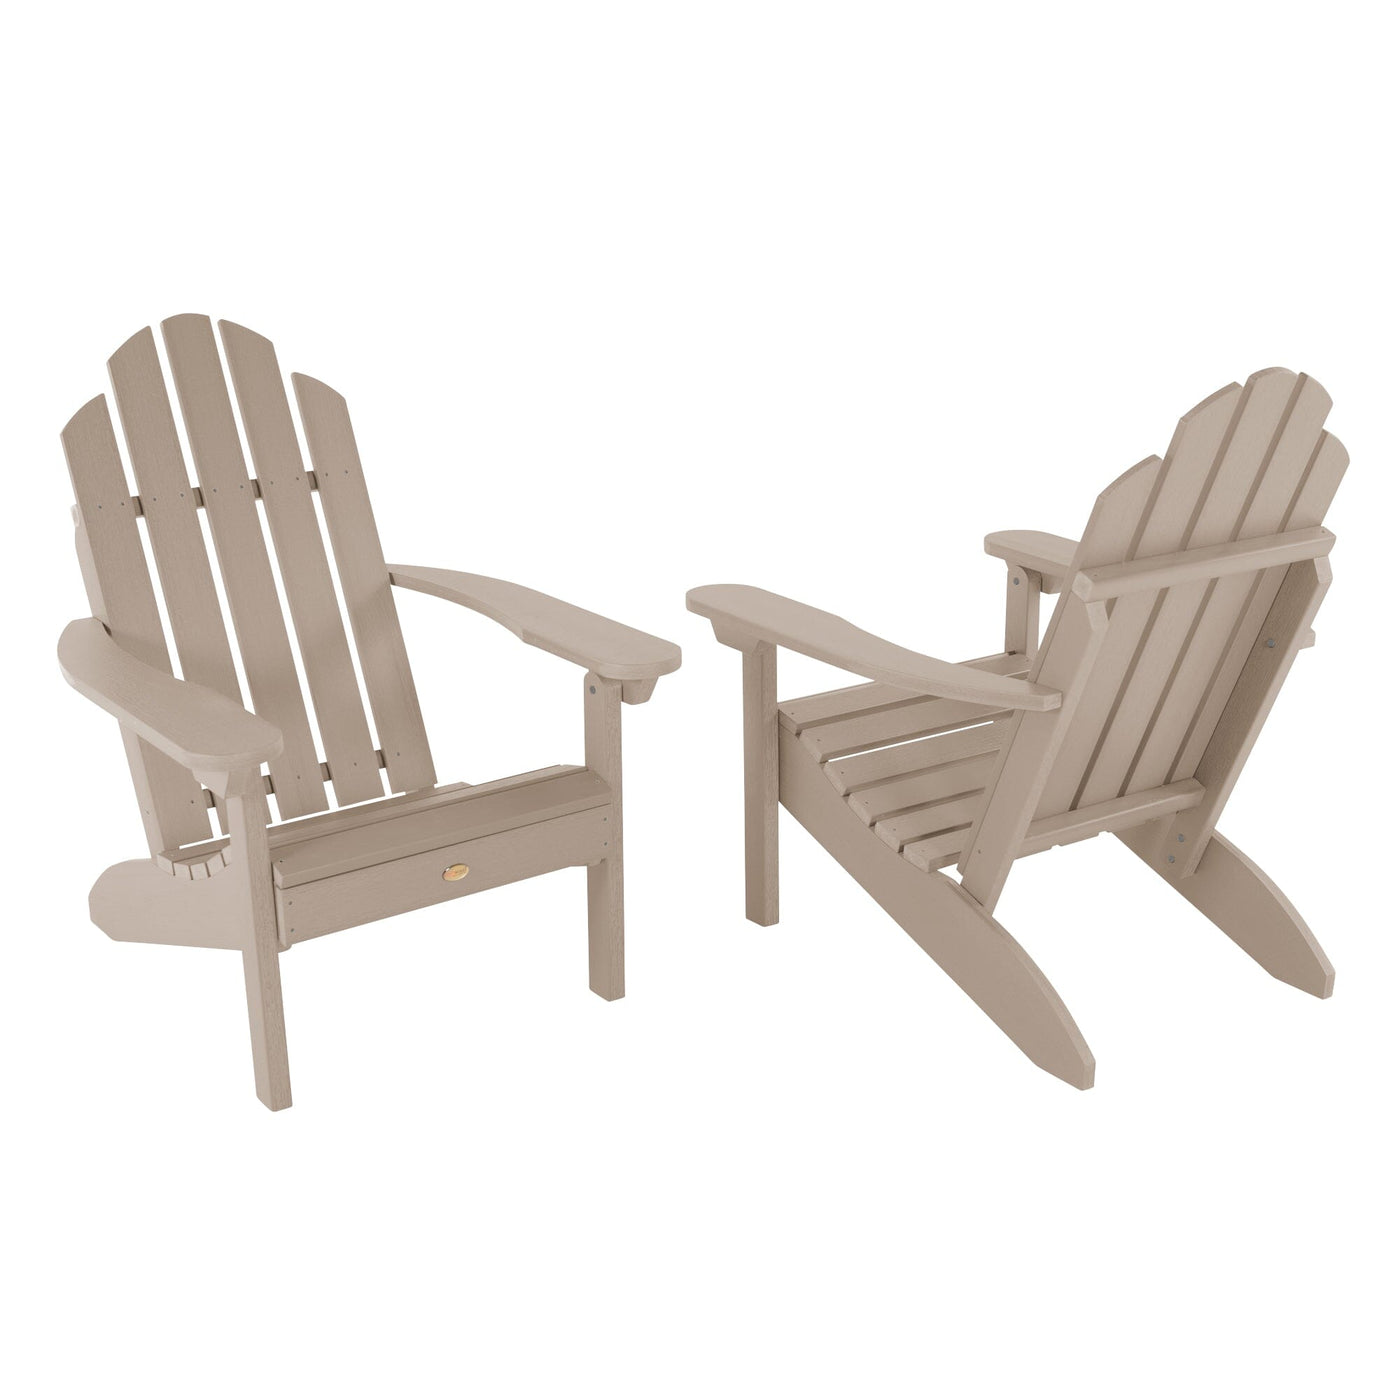 Set of Two Classic Westport Adirondack Chairs Kitted Sets Highwood USA 